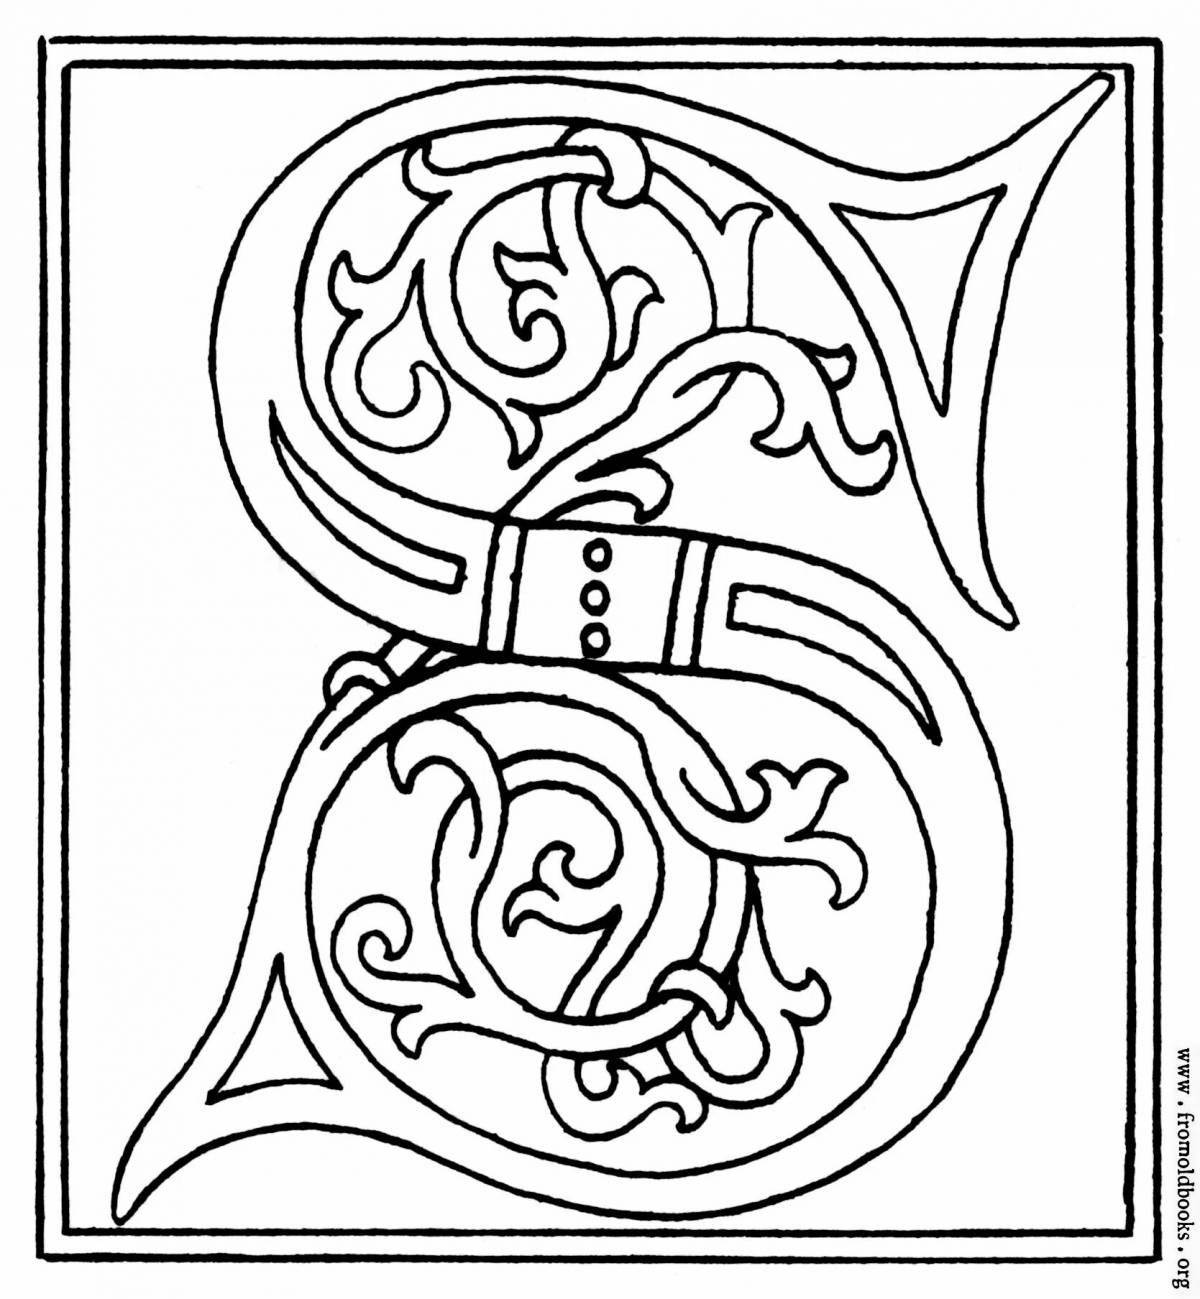 Inspirational coloring page initial letter